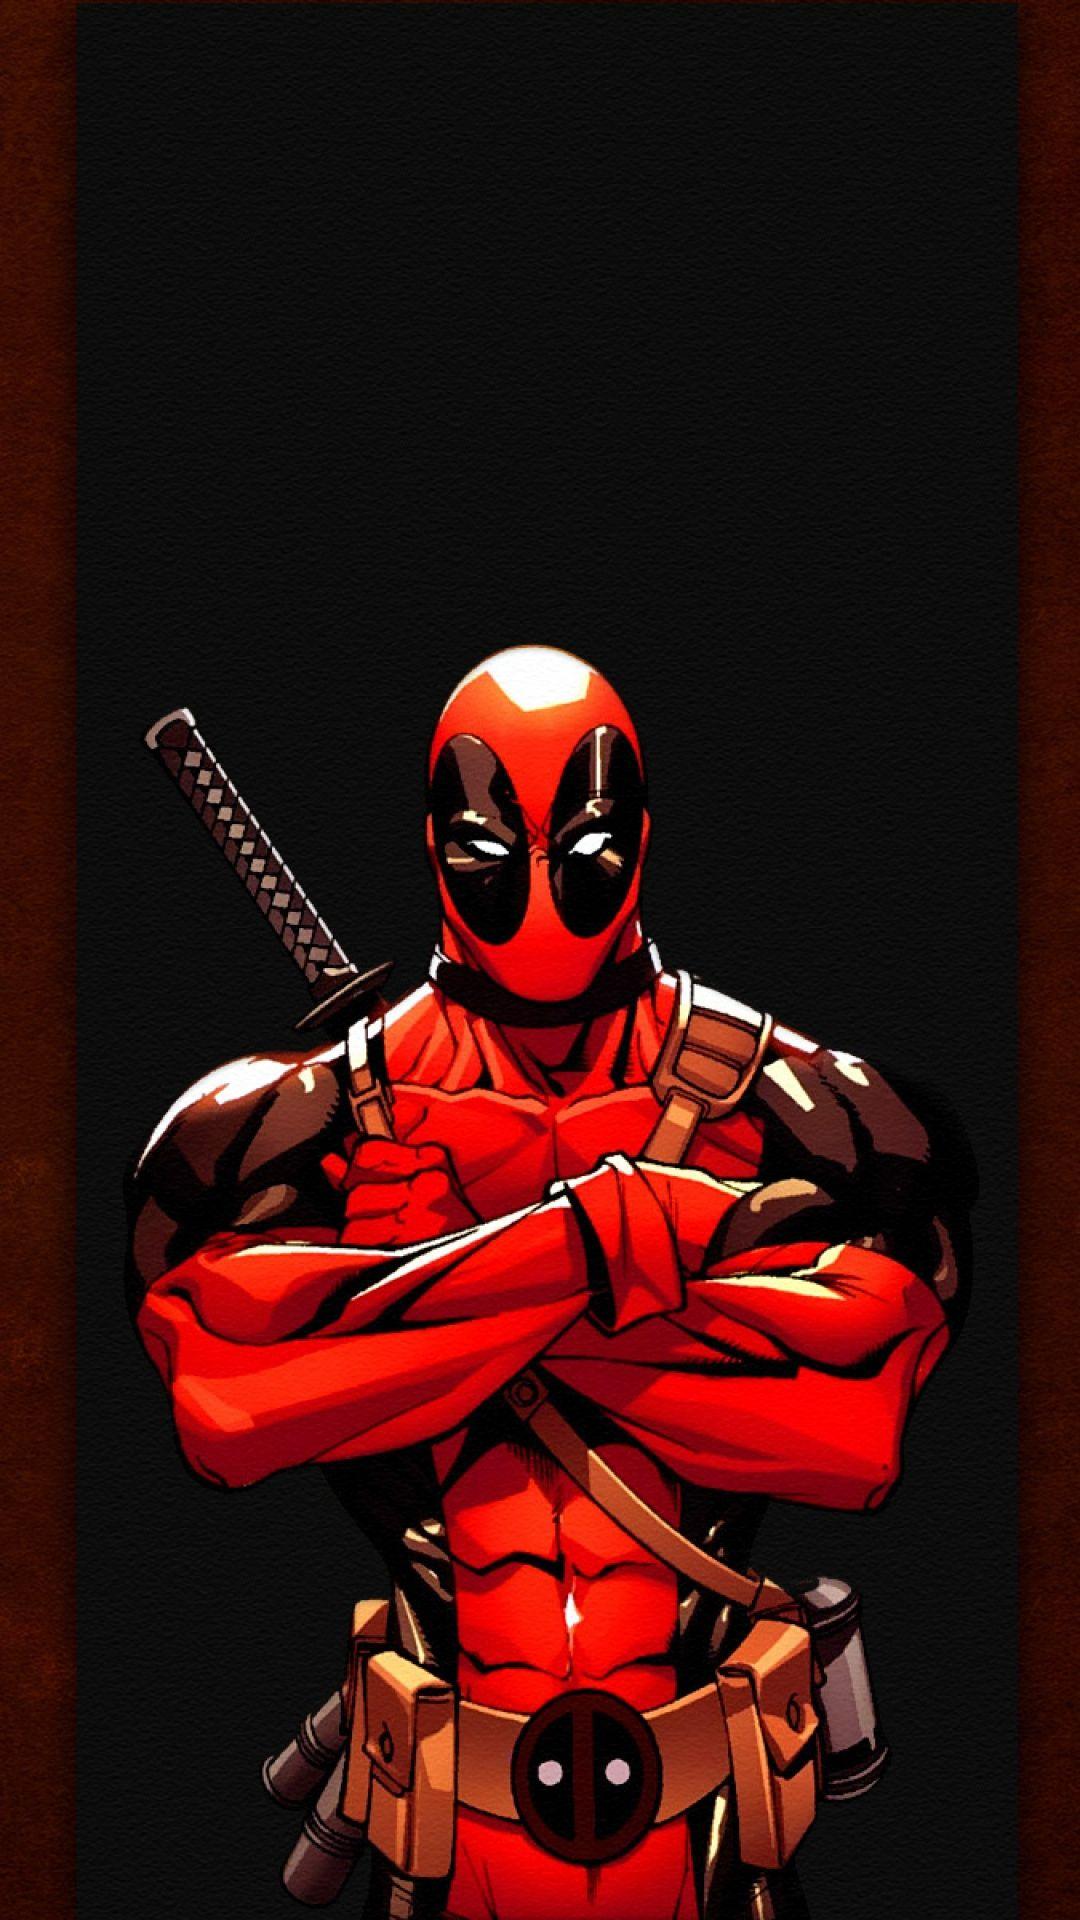 Deadpool Wallpapers for Iphone 7, Iphone 7 plus, Iphone 6 plus